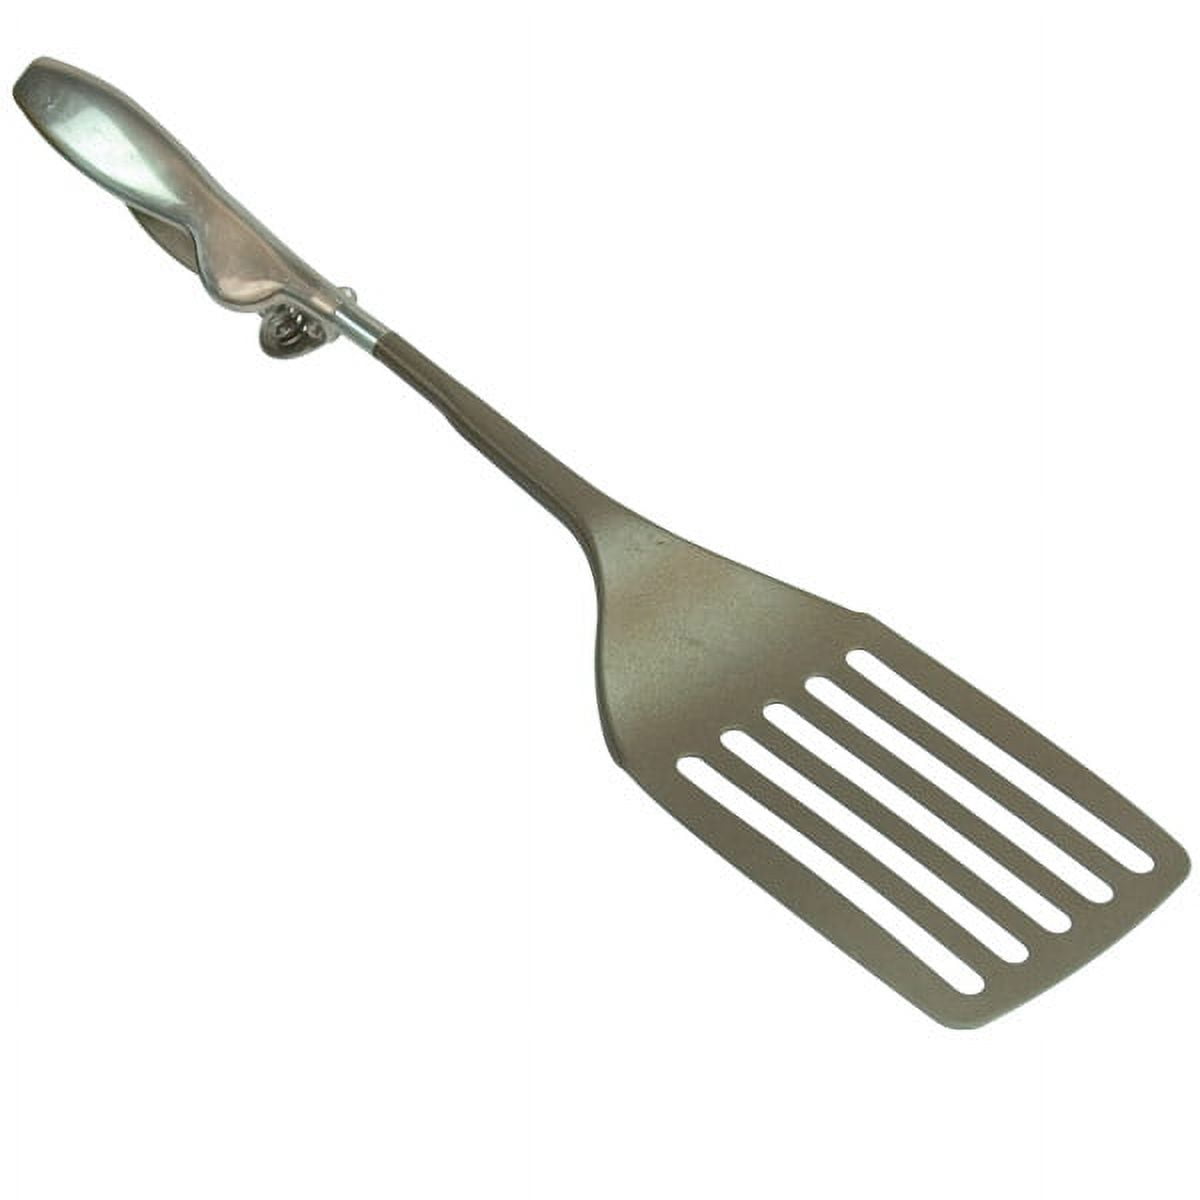 CURVED SCHOOL SPATULA - PURCHASE OF KITCHEN UTENSILS Choix longueur (cm)  24